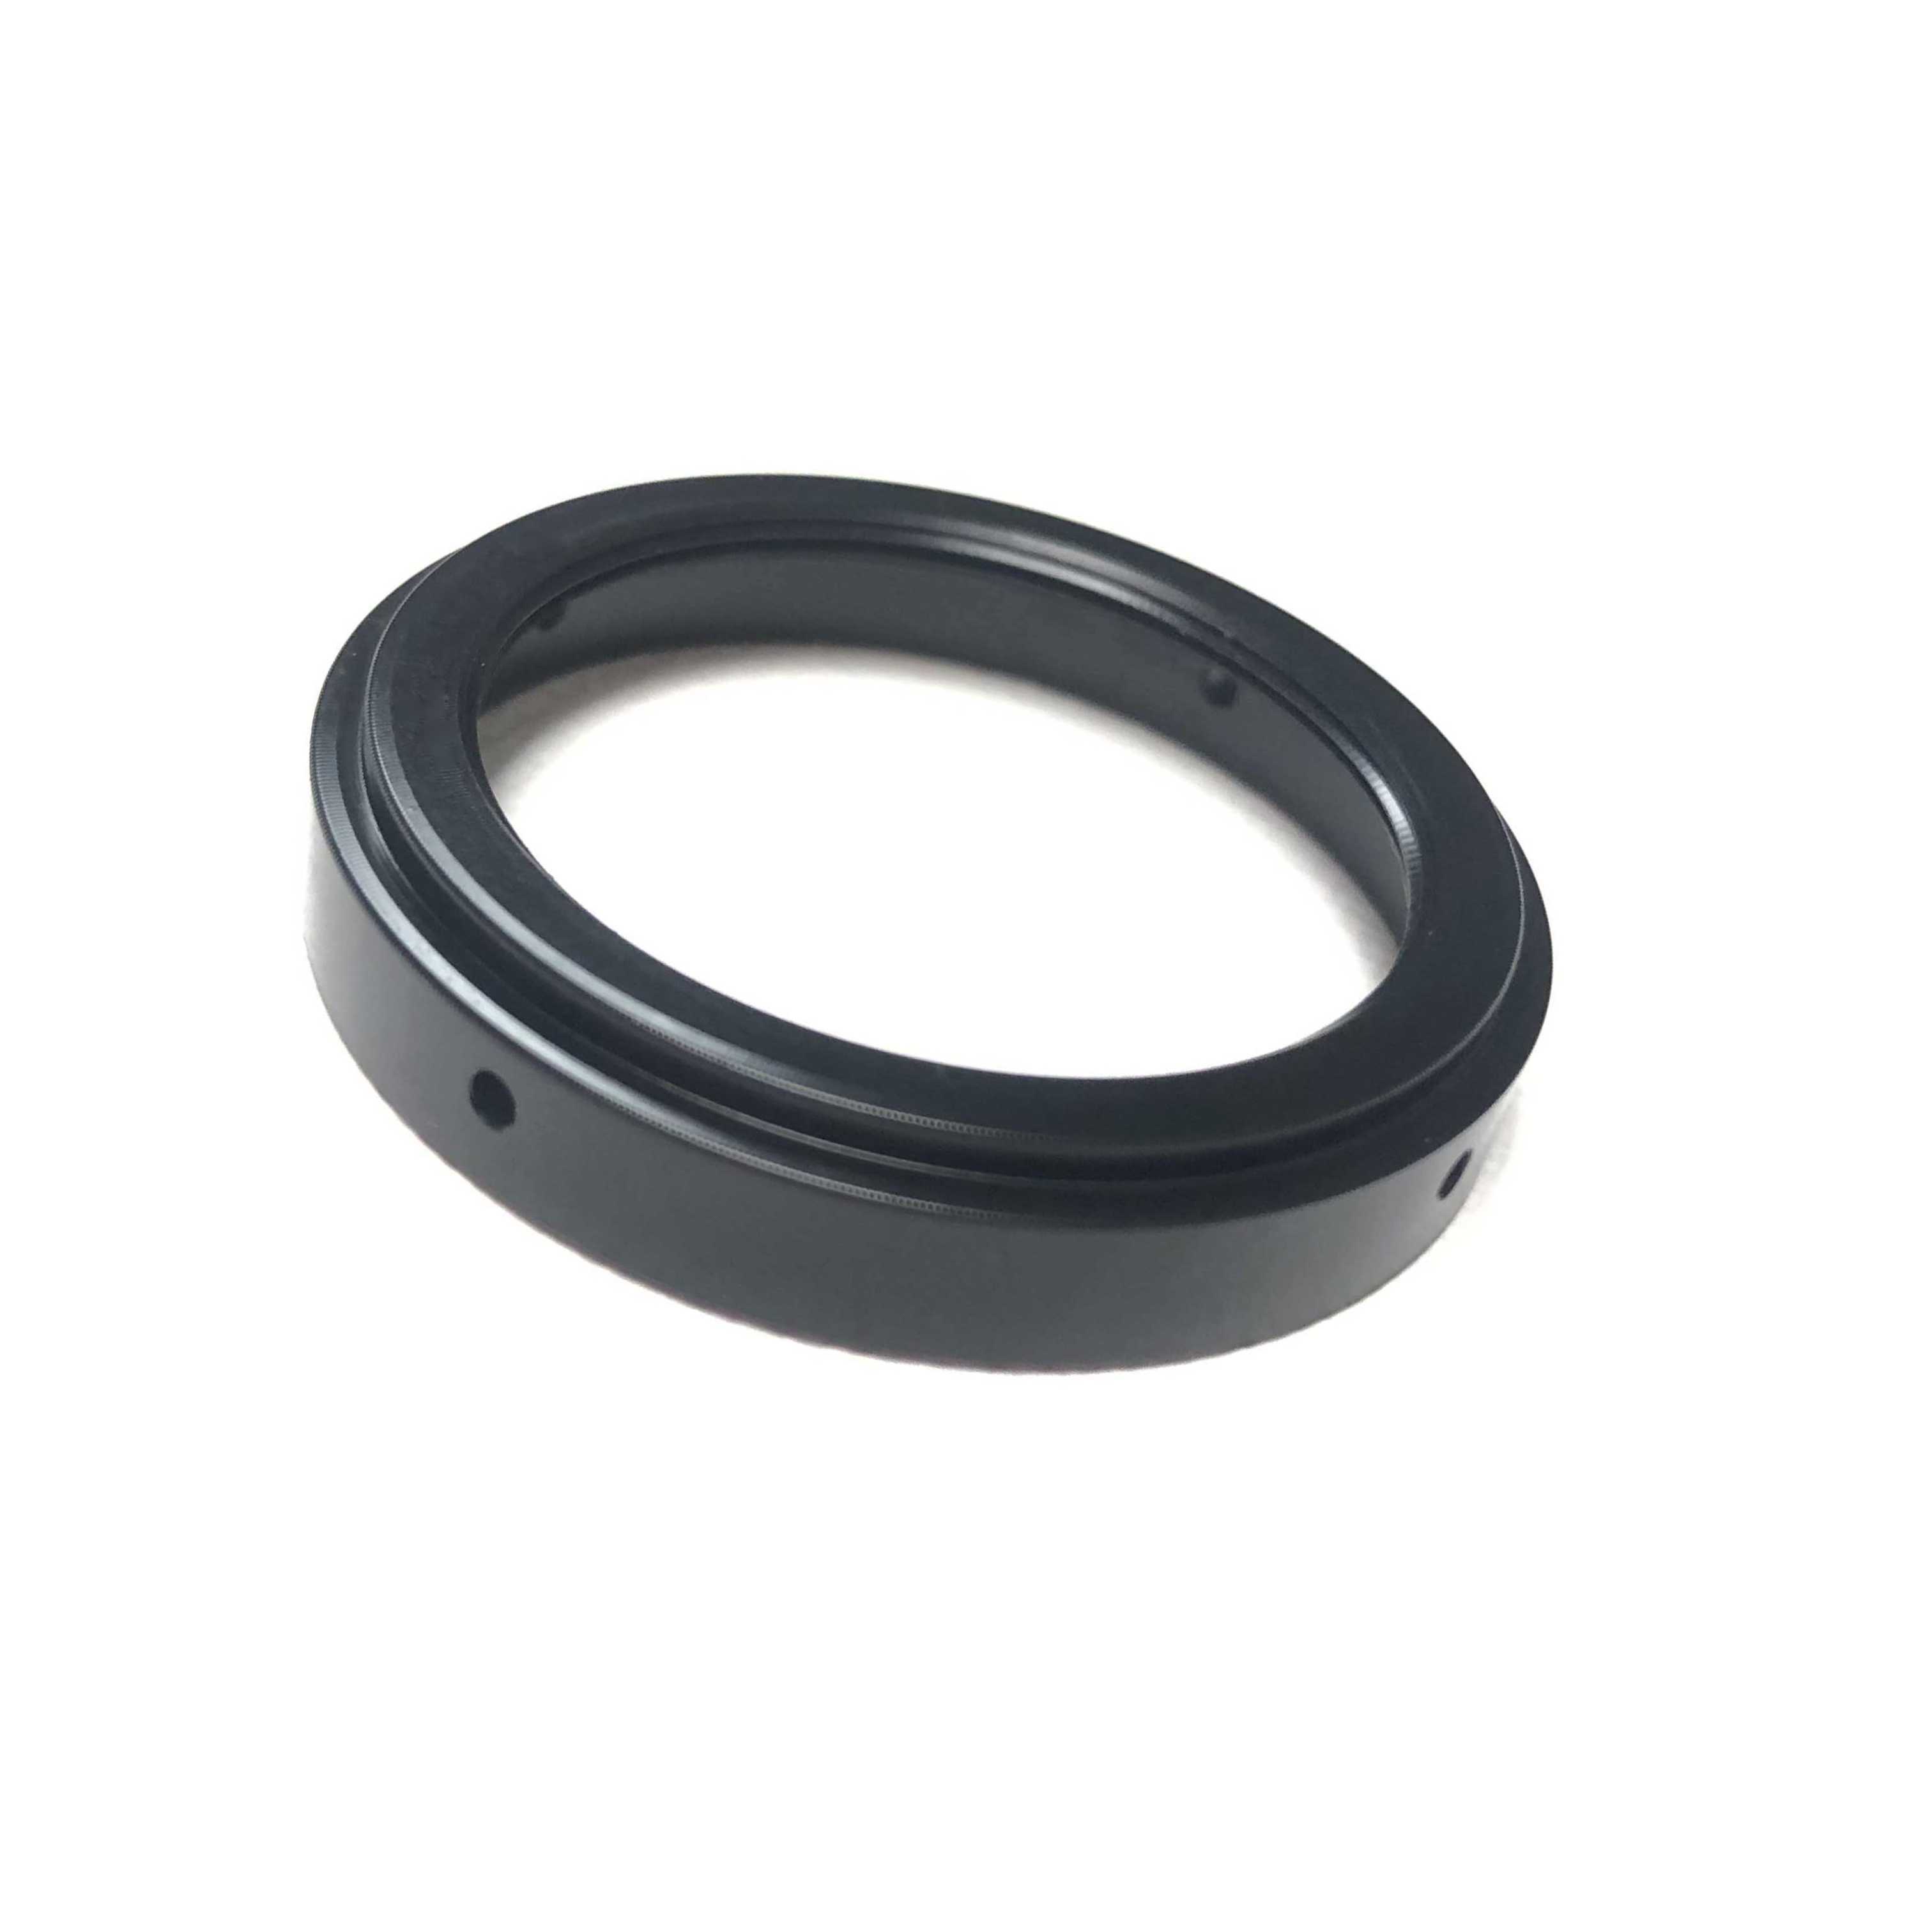 Anvis Goggle Objective Lens Locking Ring